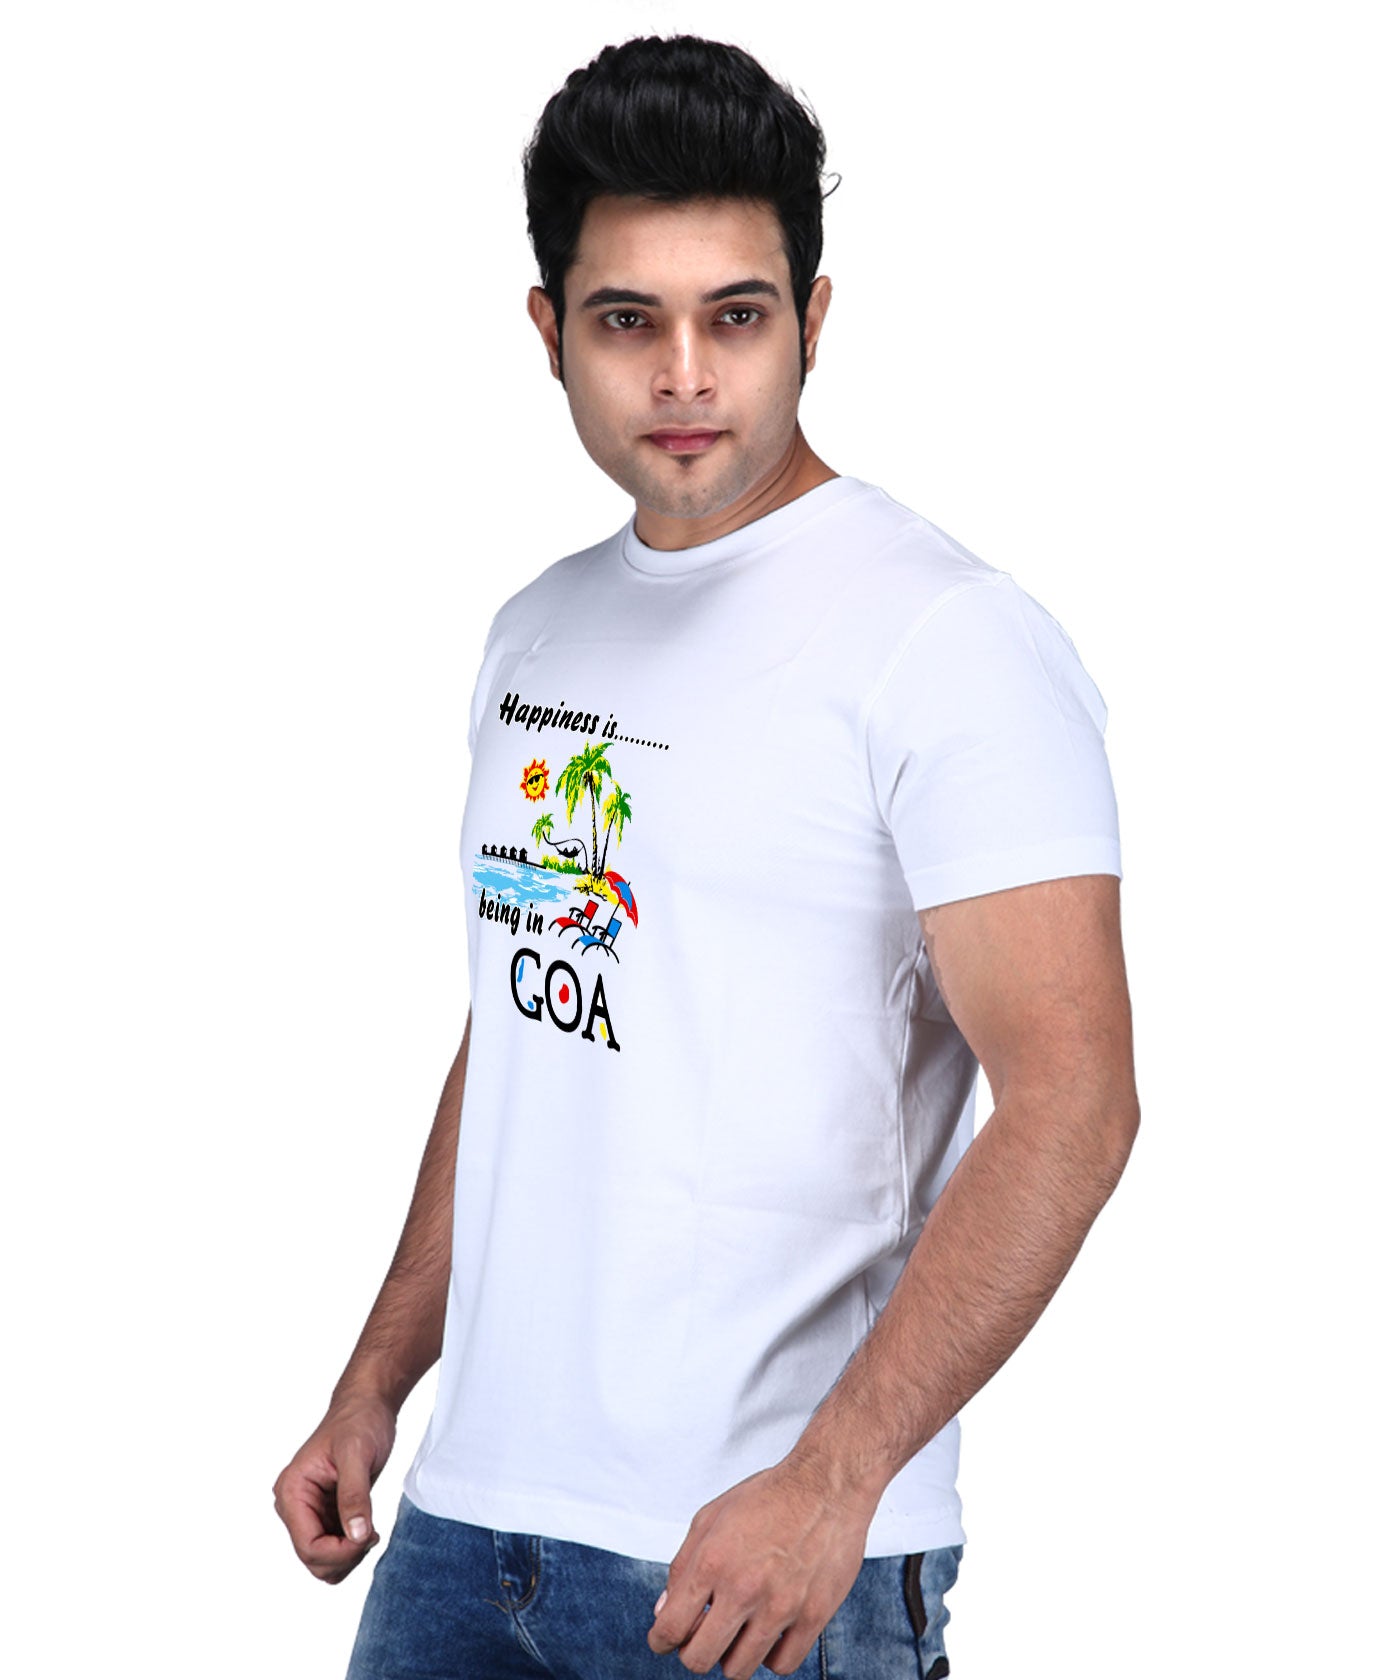 Happiness Is Being In Goa - Premium Round Neck Cotton Tees for Men - White